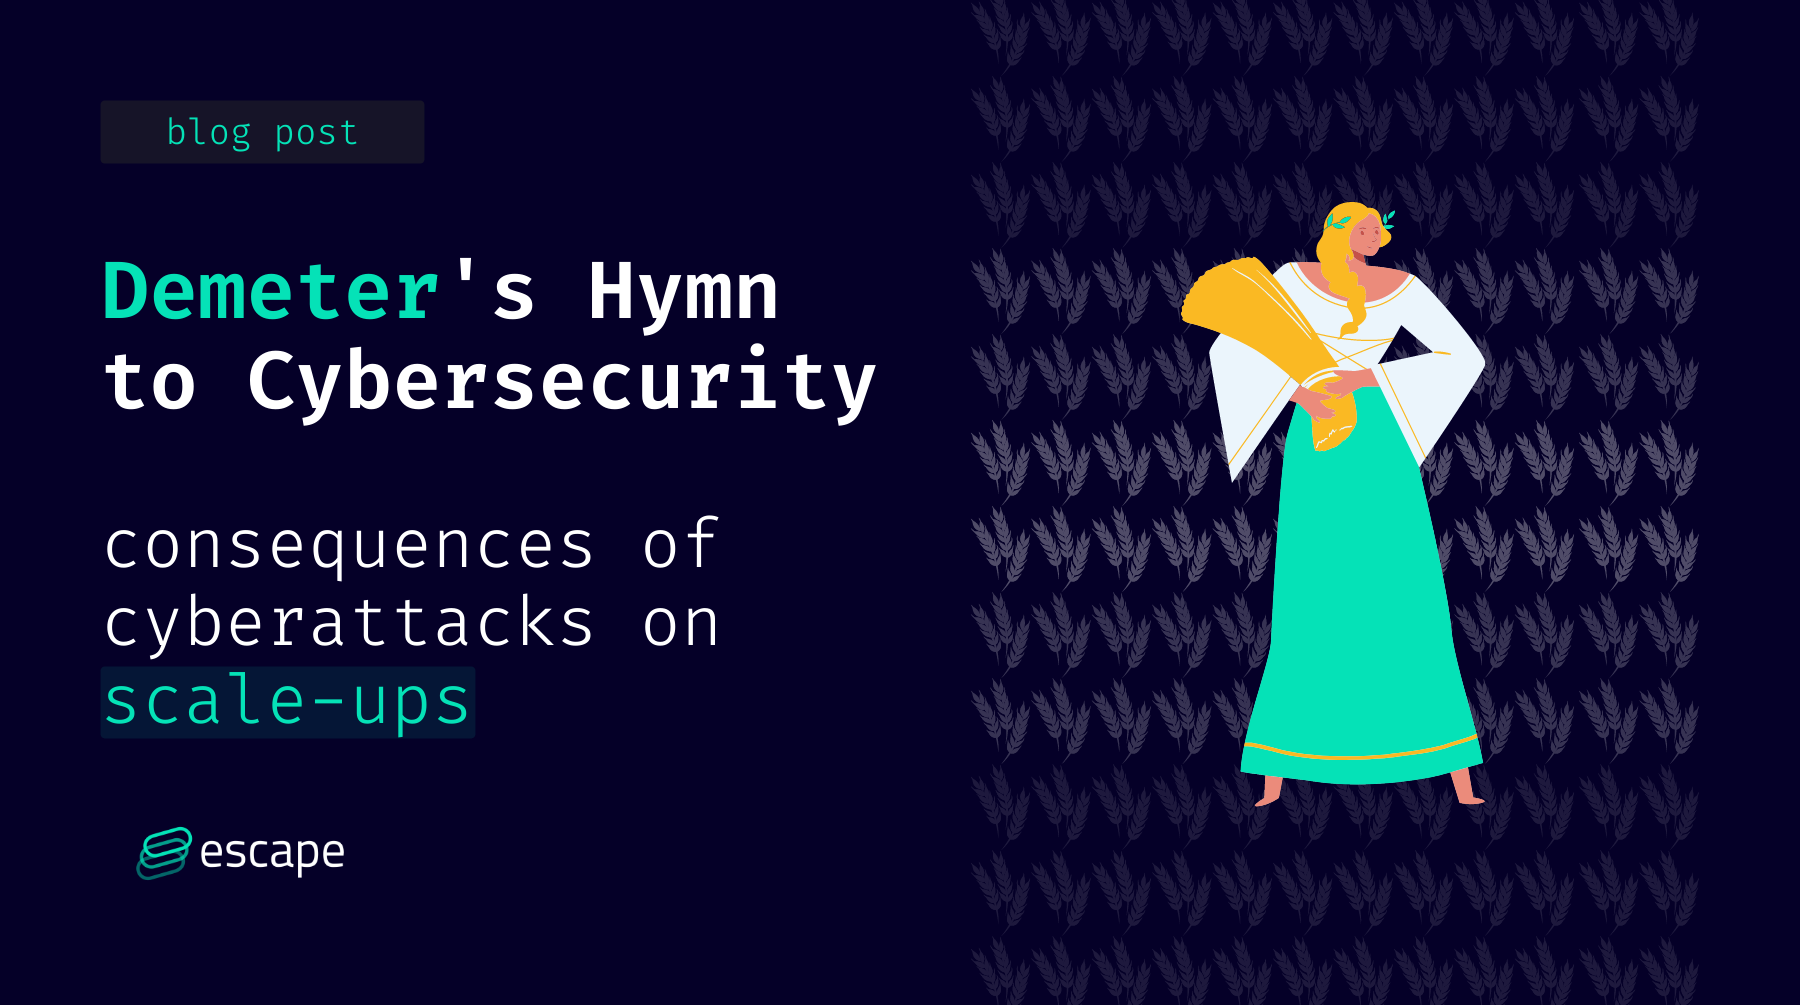 Demeter's Hymn to Cybersecurity: Consequences of Cyberattacks on Scale-Ups